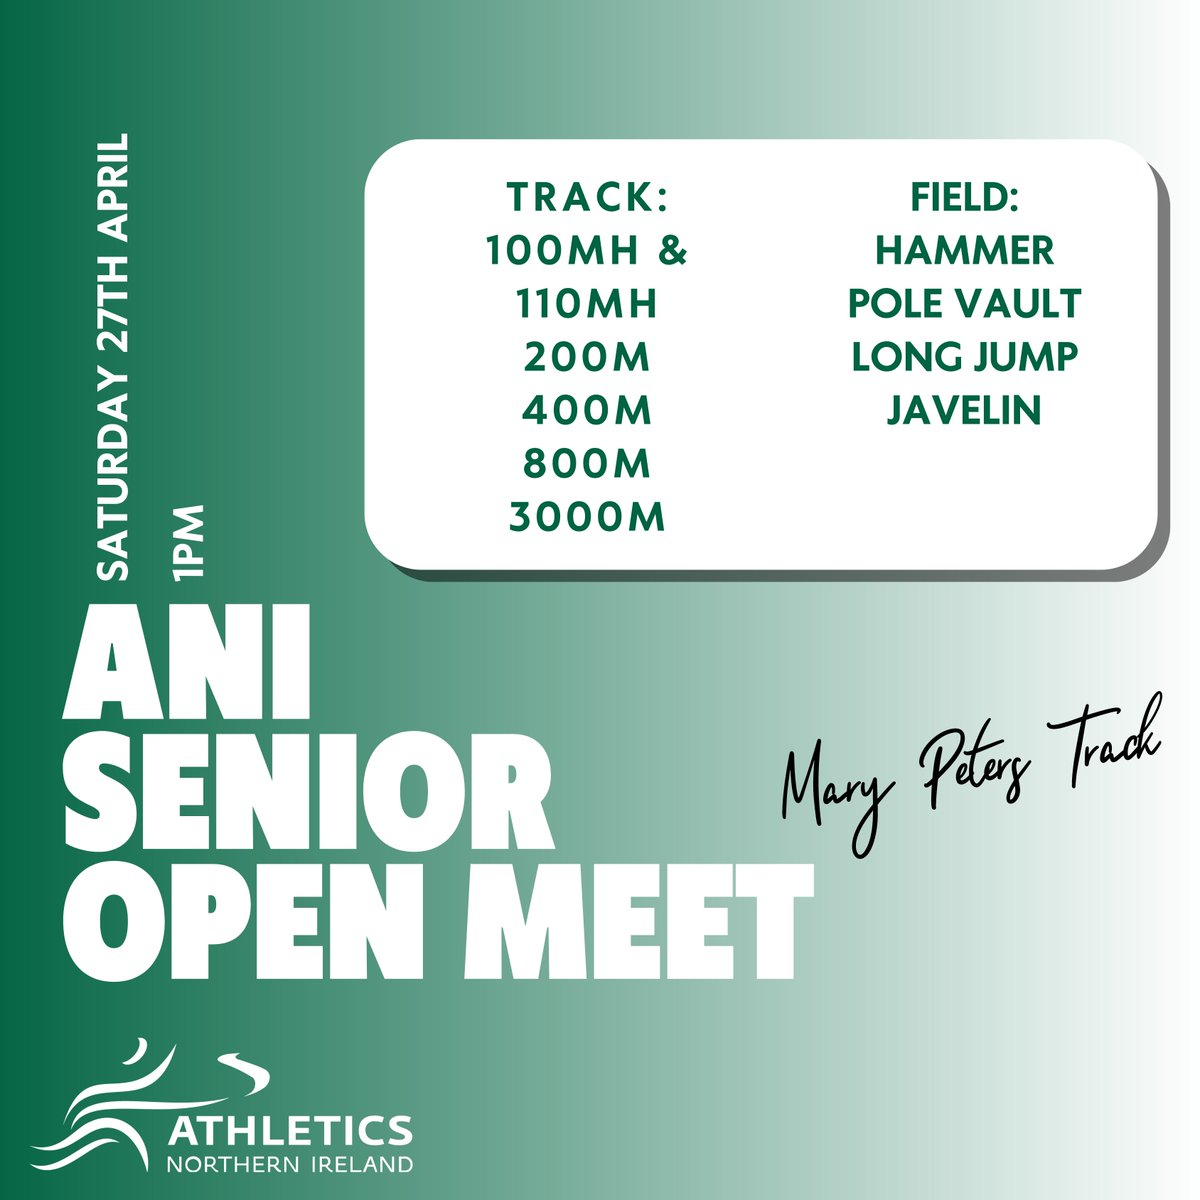 📢 ANI Senior Open Meet The deadline to enter the ANI Senior Open Meet on Saturday 27th April is nearly here! Sign up now 👇 athleticsni.org/Fixtures/ANI-S… #ANIOpenMeet #TrackandField